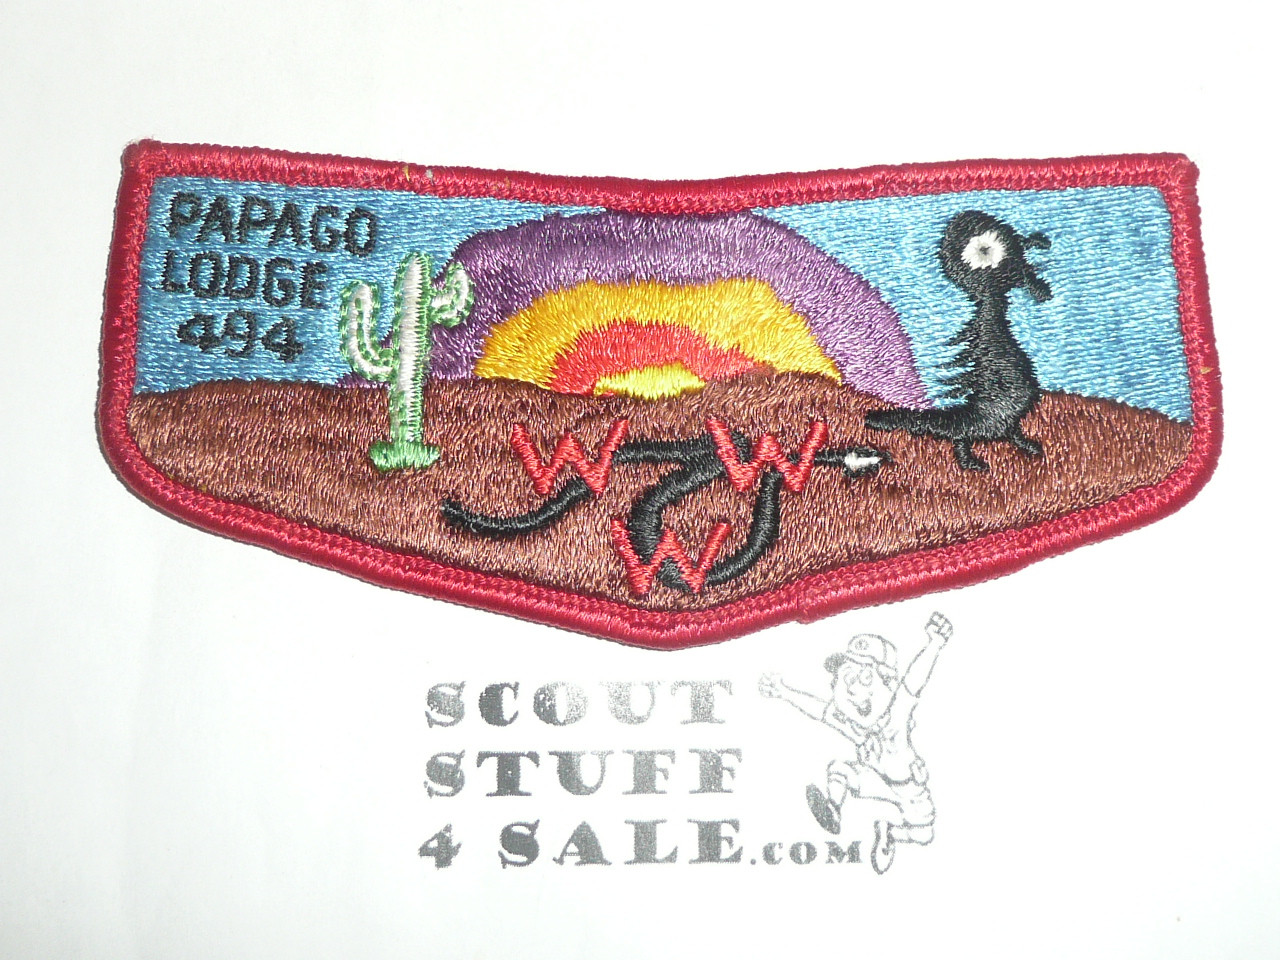 Order of the Arrow Lodge #494 Papago UNLISTED s2 (Quail has full beak and plume under) Flap Patch, unused